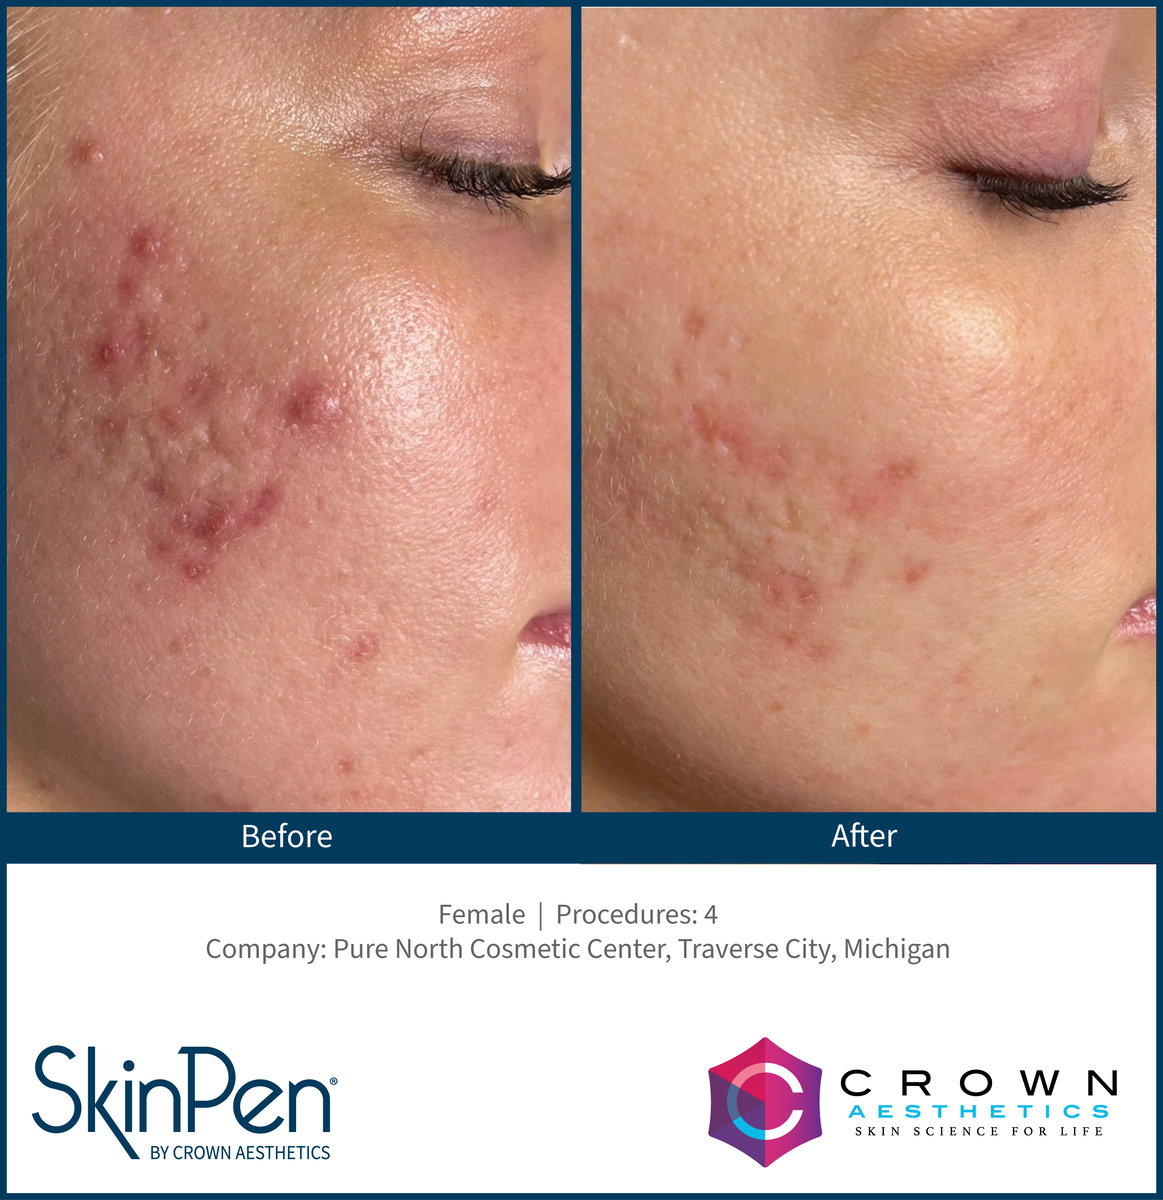 real patient shown before and after treatment with SkinPen®